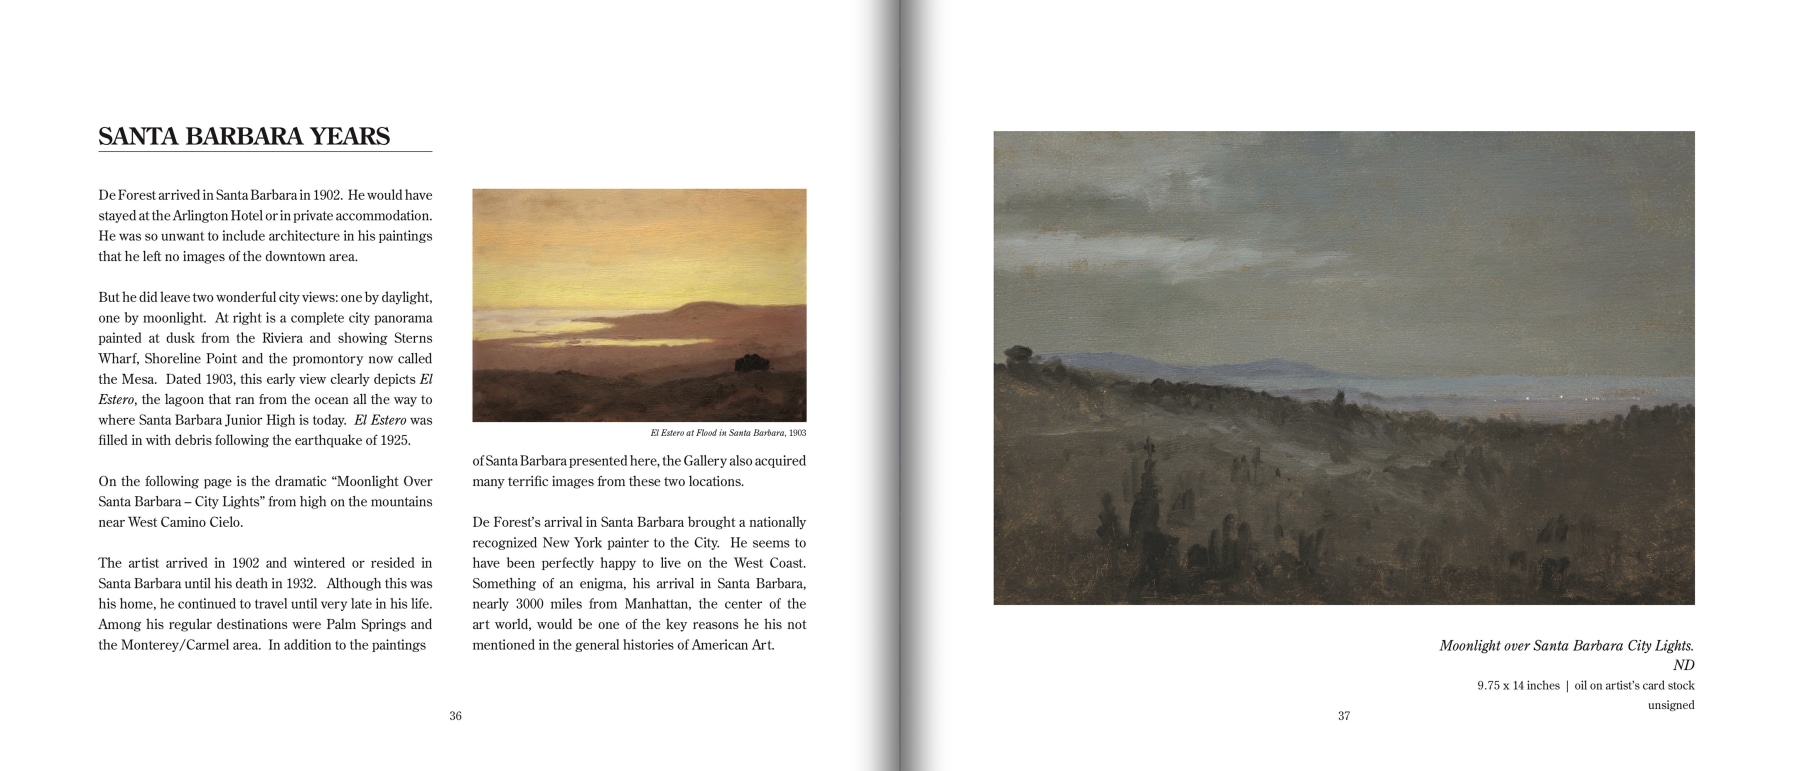 Pages 36 and 37 of De Forest's SANTA BARBARA, featuring remark &quot;Santa Barbara Years&quot; and &quot;Moonlight over Santa Barbara City Lights&quot; by Lockwood de Forest (1850-1932)